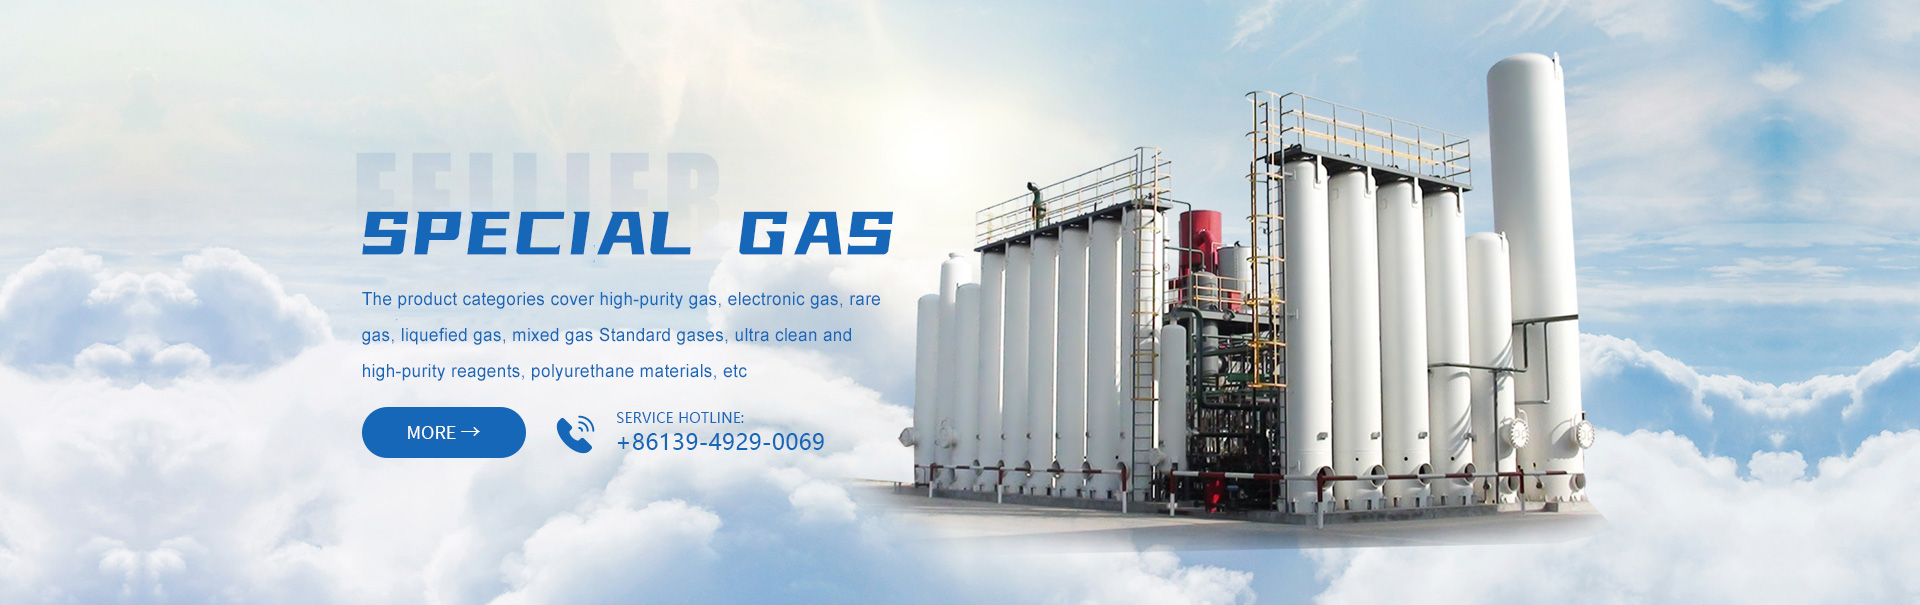 Luoyang Filier Special Gas Co., Ltd